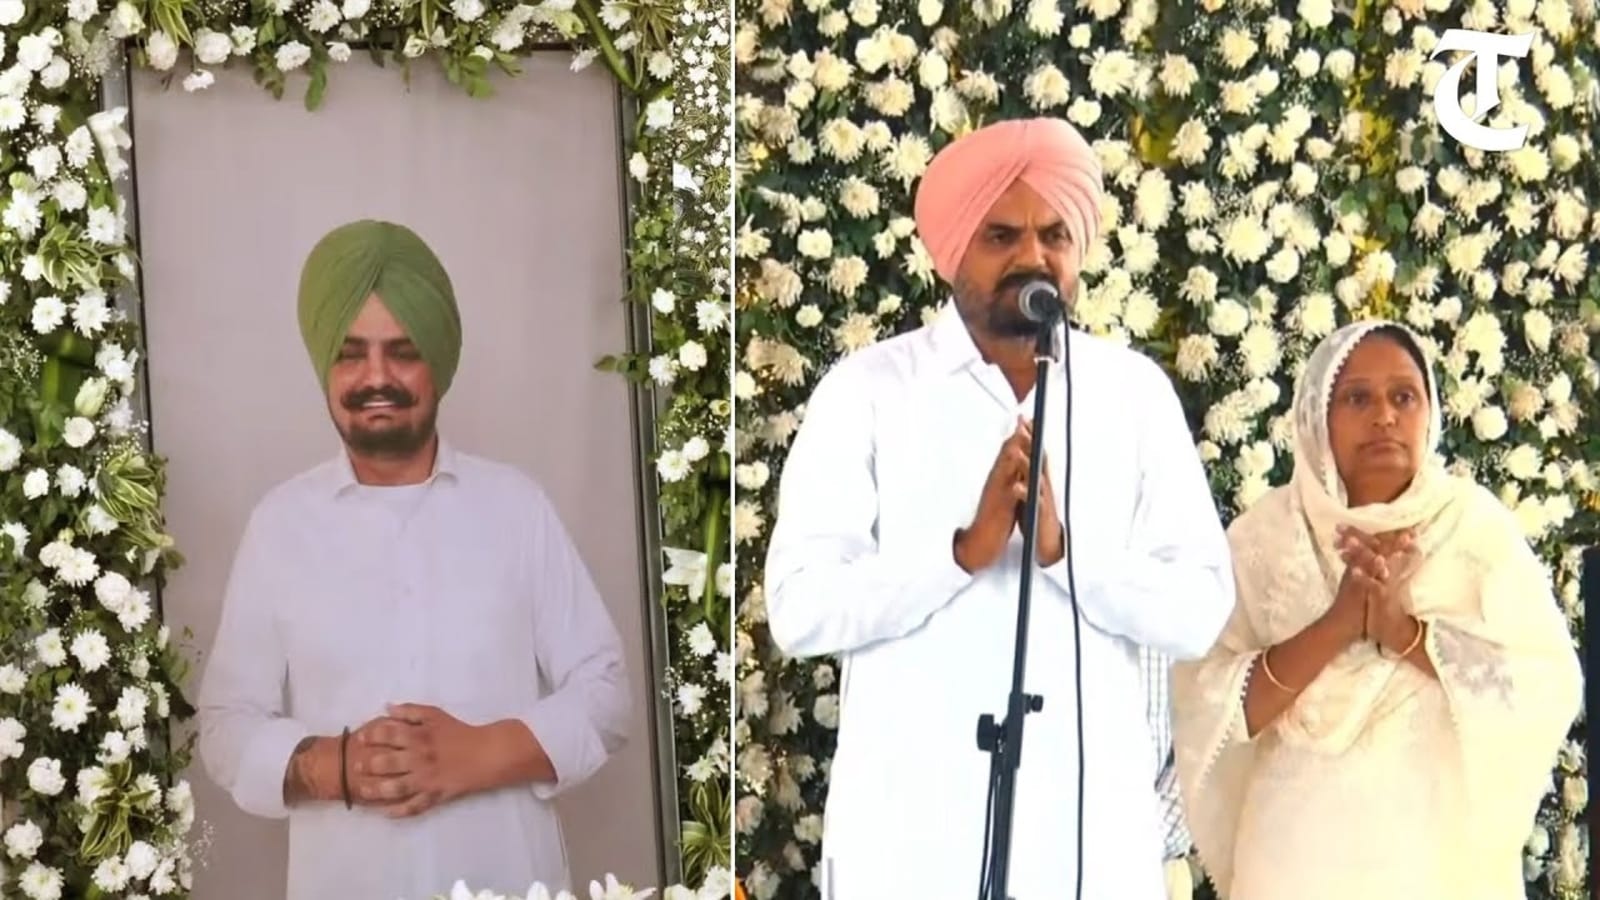 Sidhu Moose Wala's father says ‘I am ruined’ after son's death: 'He hugged me and cried'